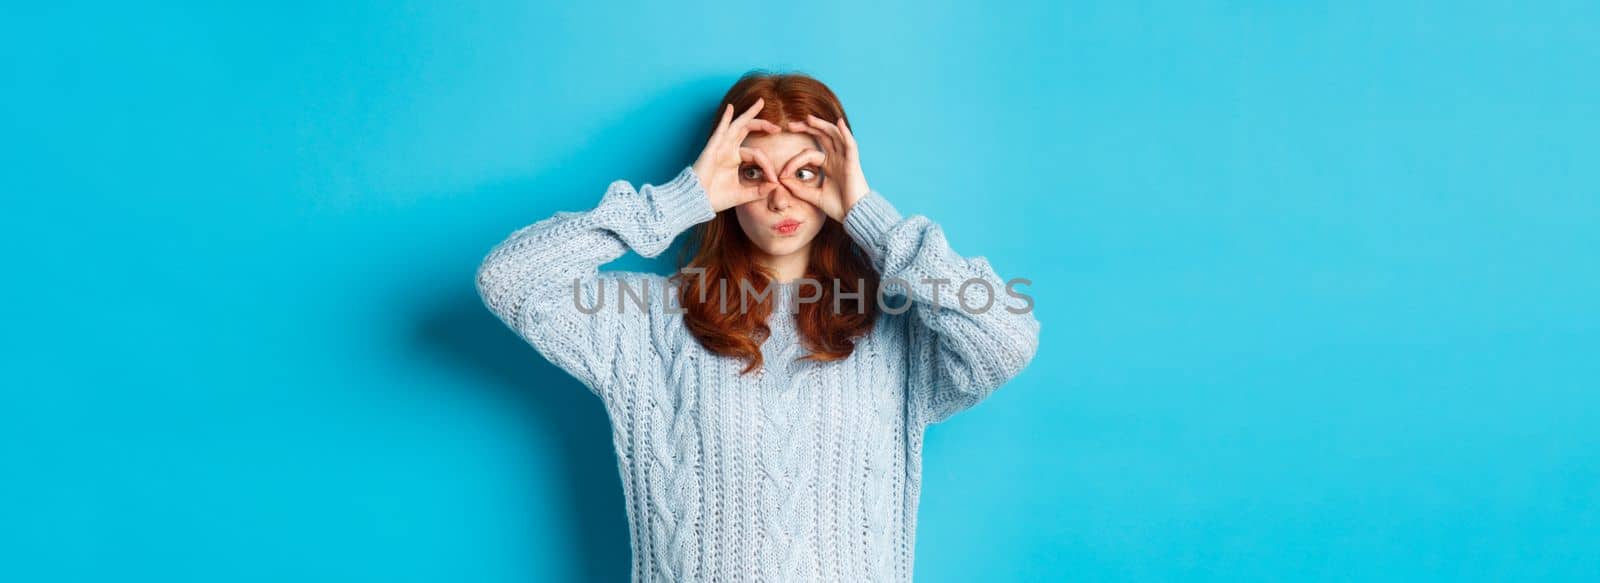 Funny redhead female model in sweater, staring at camera through fingers glasses, express interest and amazement, standing over blue background.